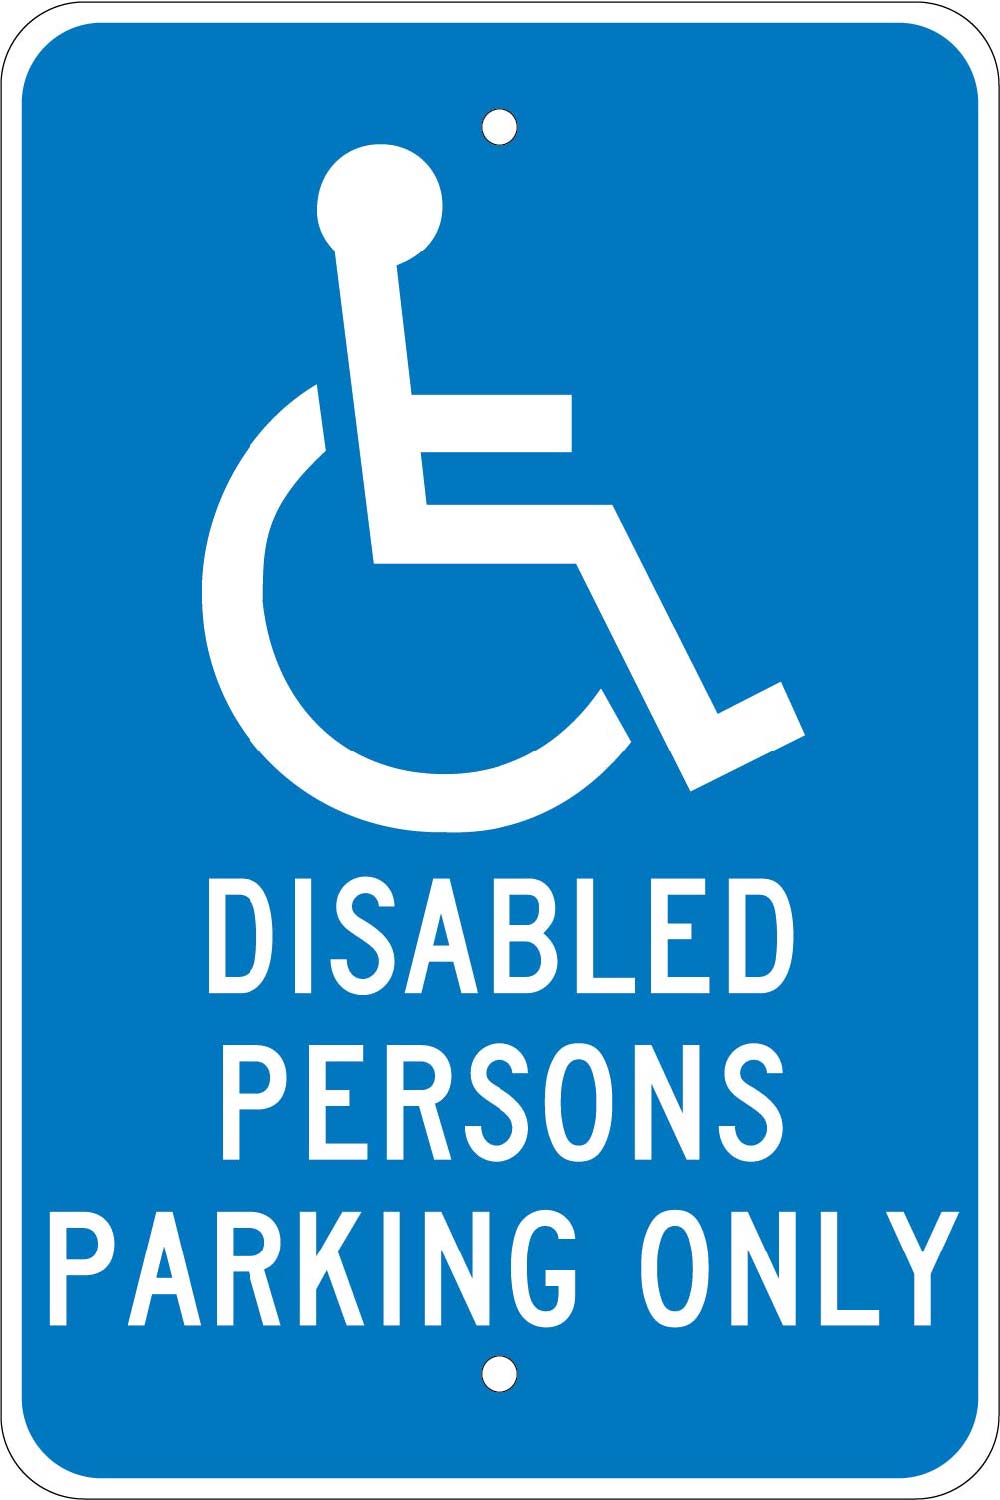 Disabled Persons Parking Only Sign-eSafety Supplies, Inc